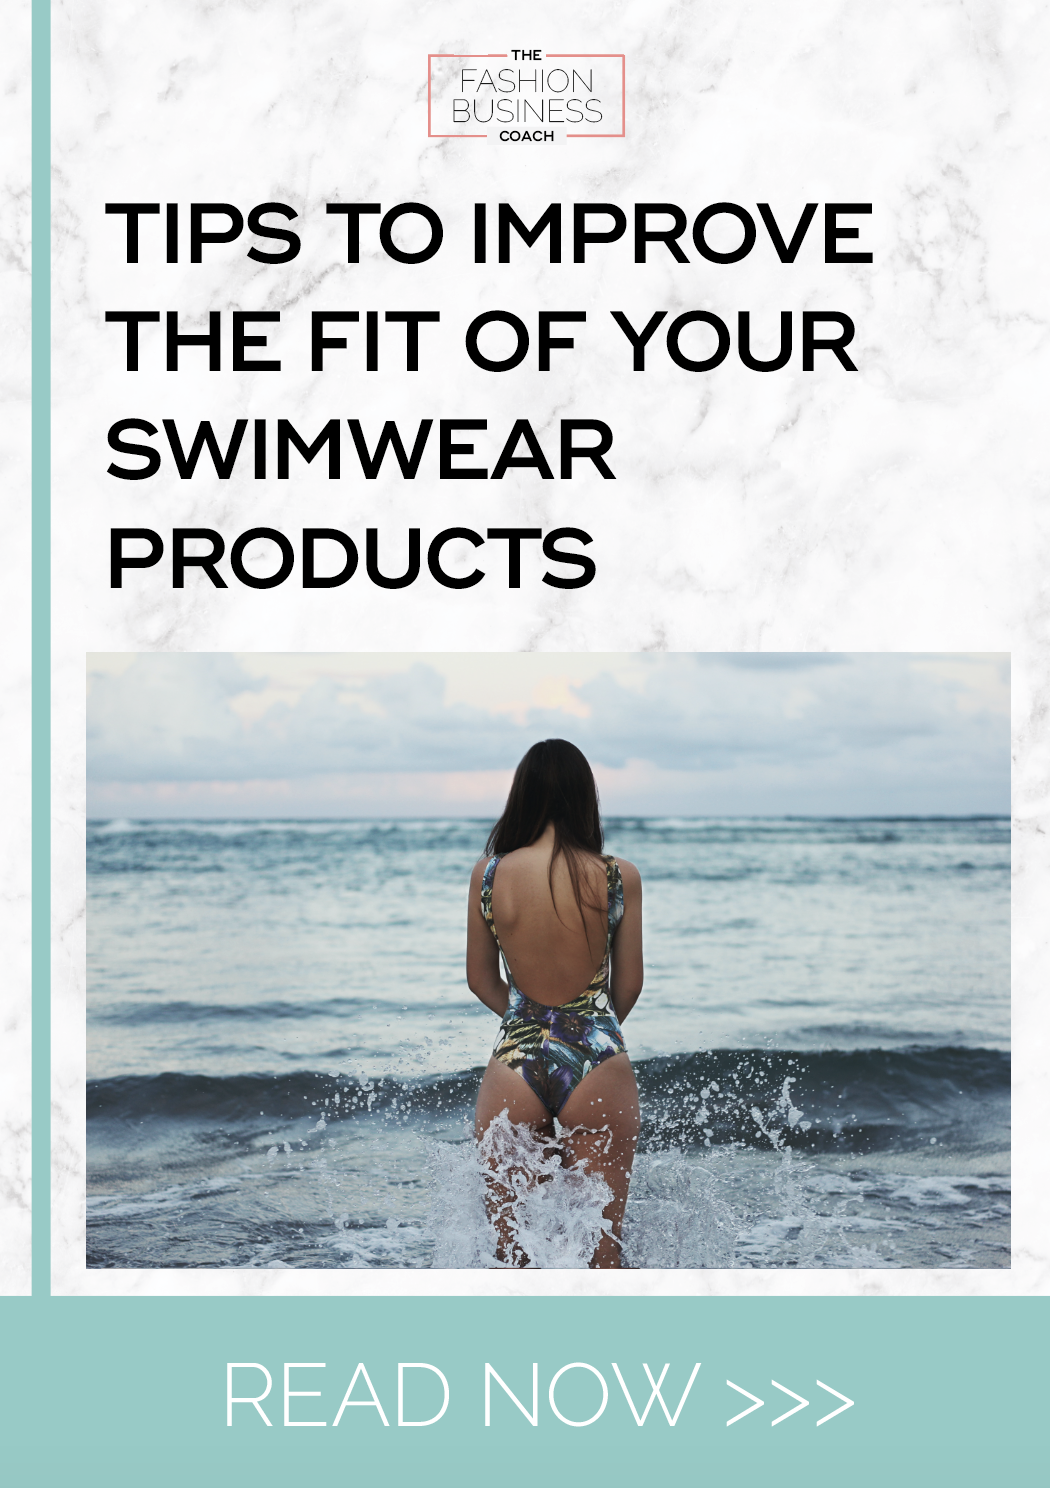 Tips to Improve the Fit of Your Swimwear Products 1.png